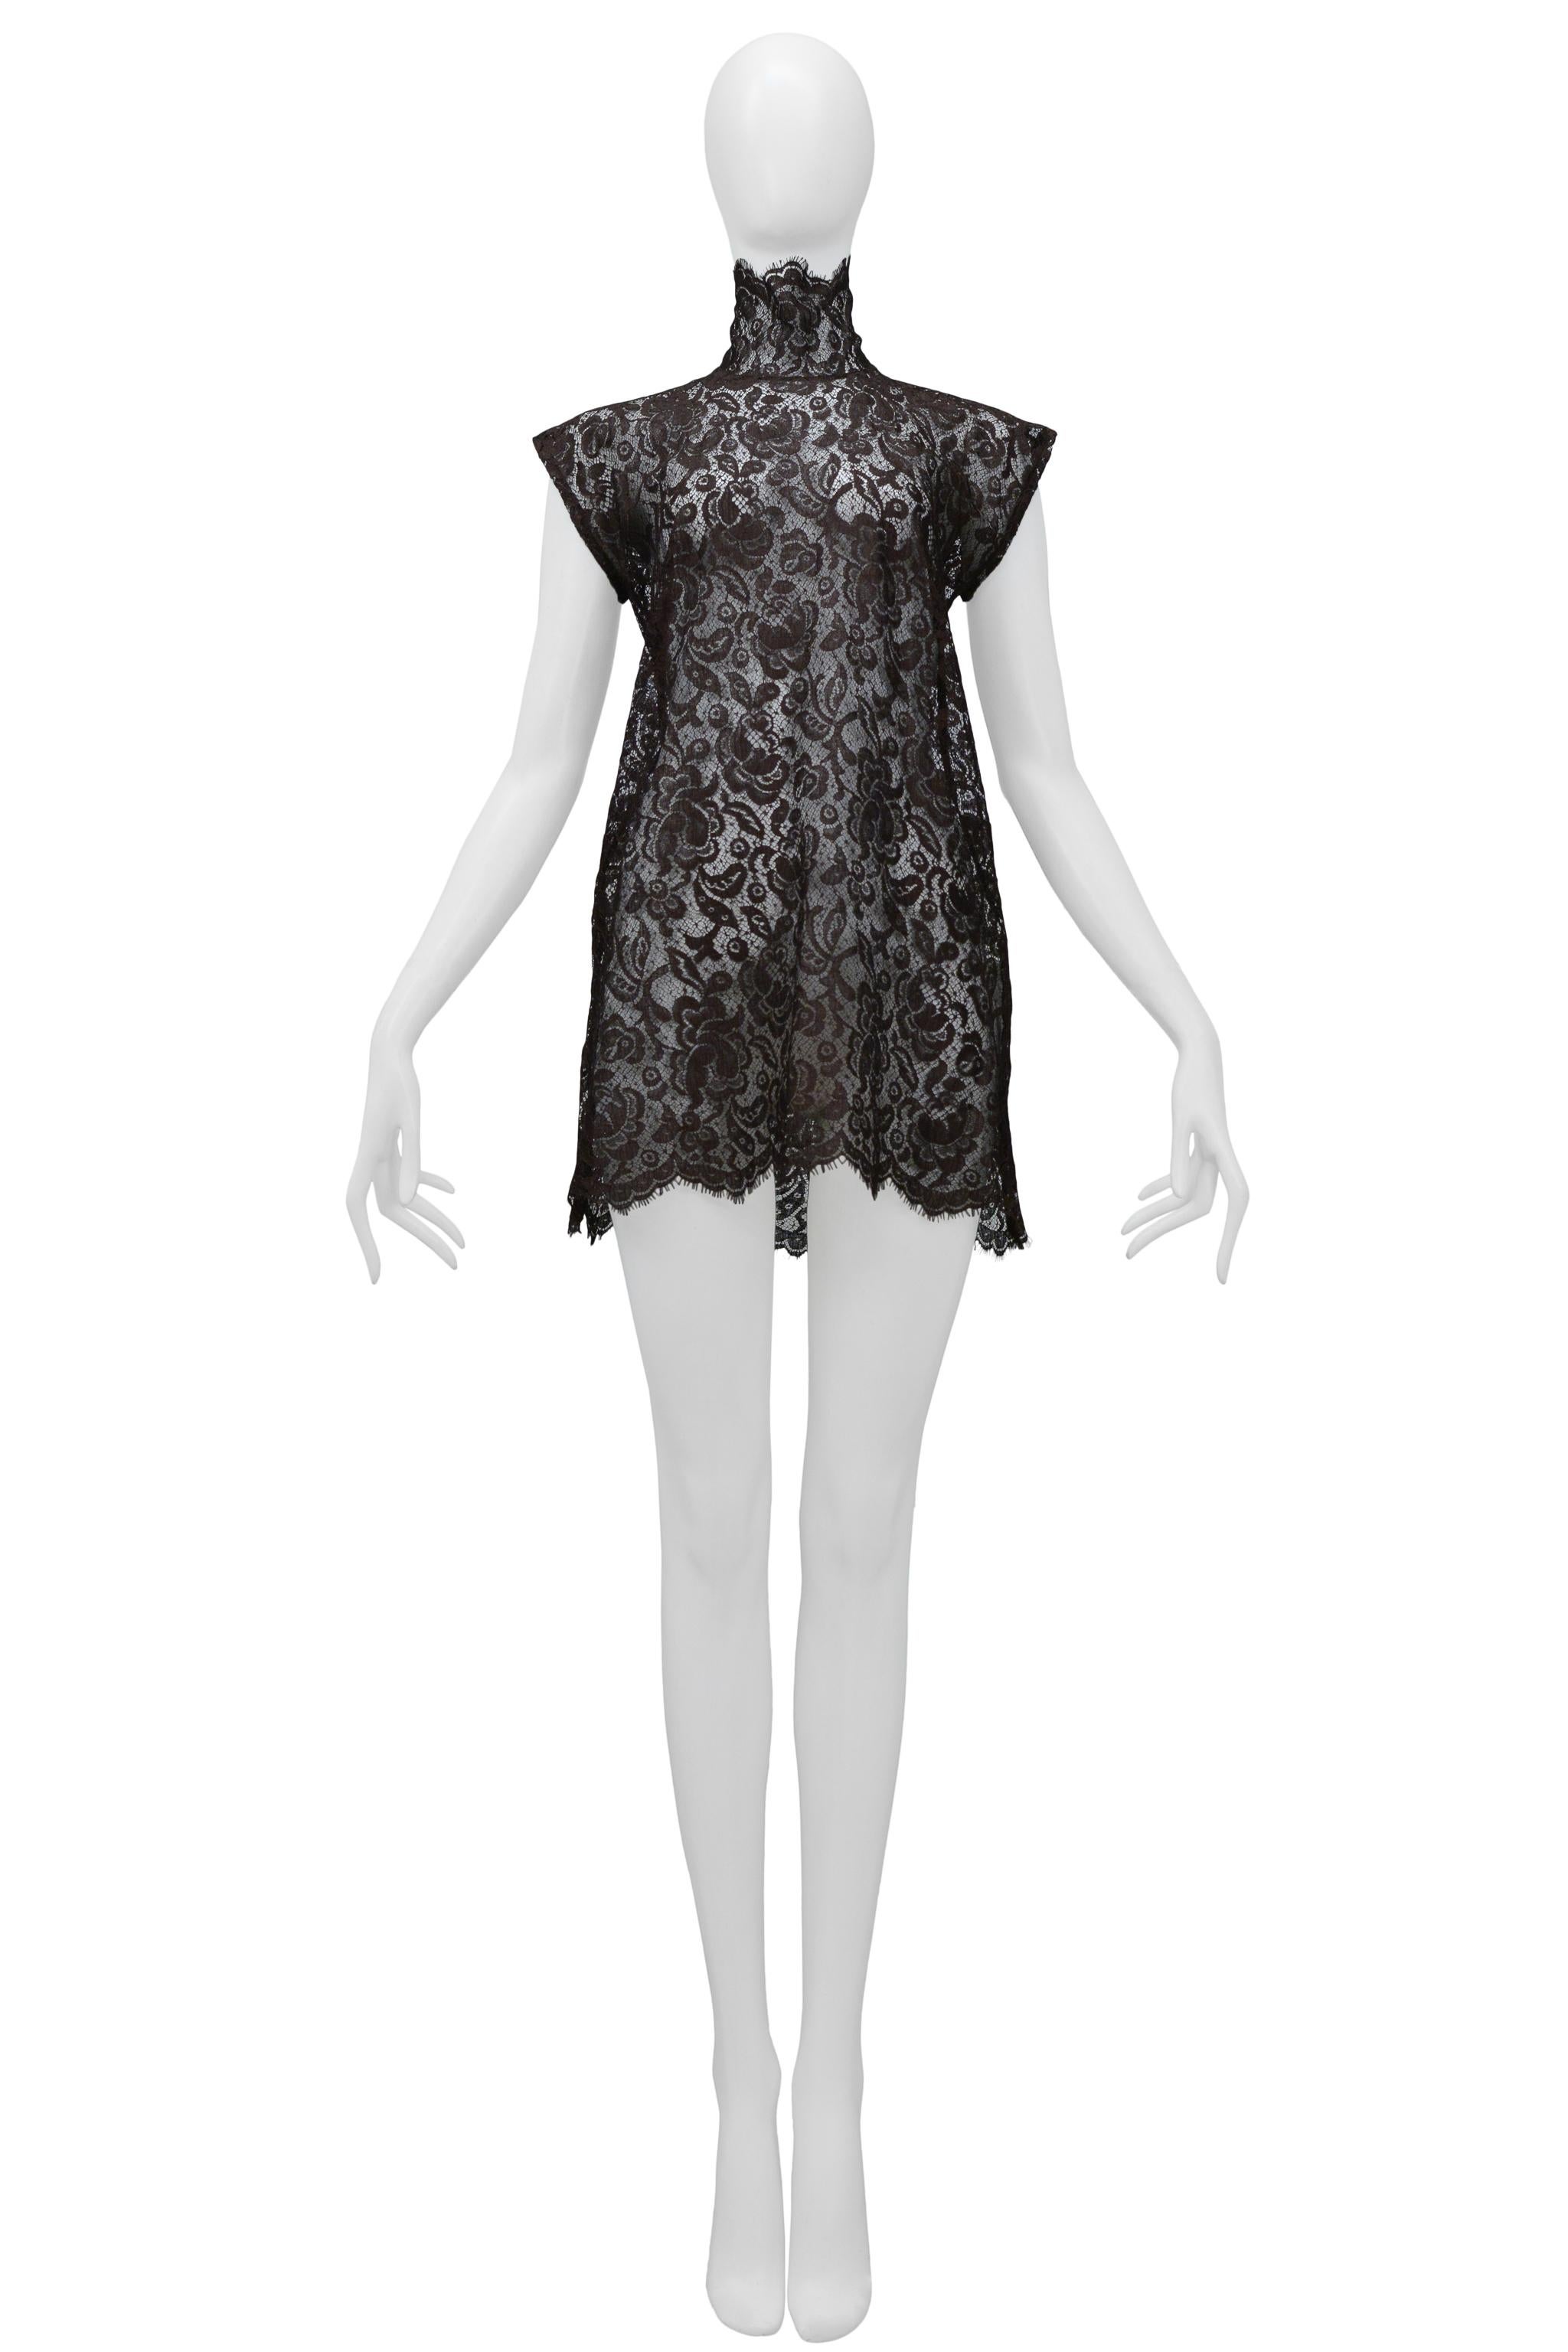 Resurrection Vintage is excited to offer a vintage Dolce & Gabbana brown lace mini dress featuring a high neck, cap sleeves, and center back zipper.

Dolce & Gabbana
Lace
38
Made in Italy
Excellent Vintage Condition 